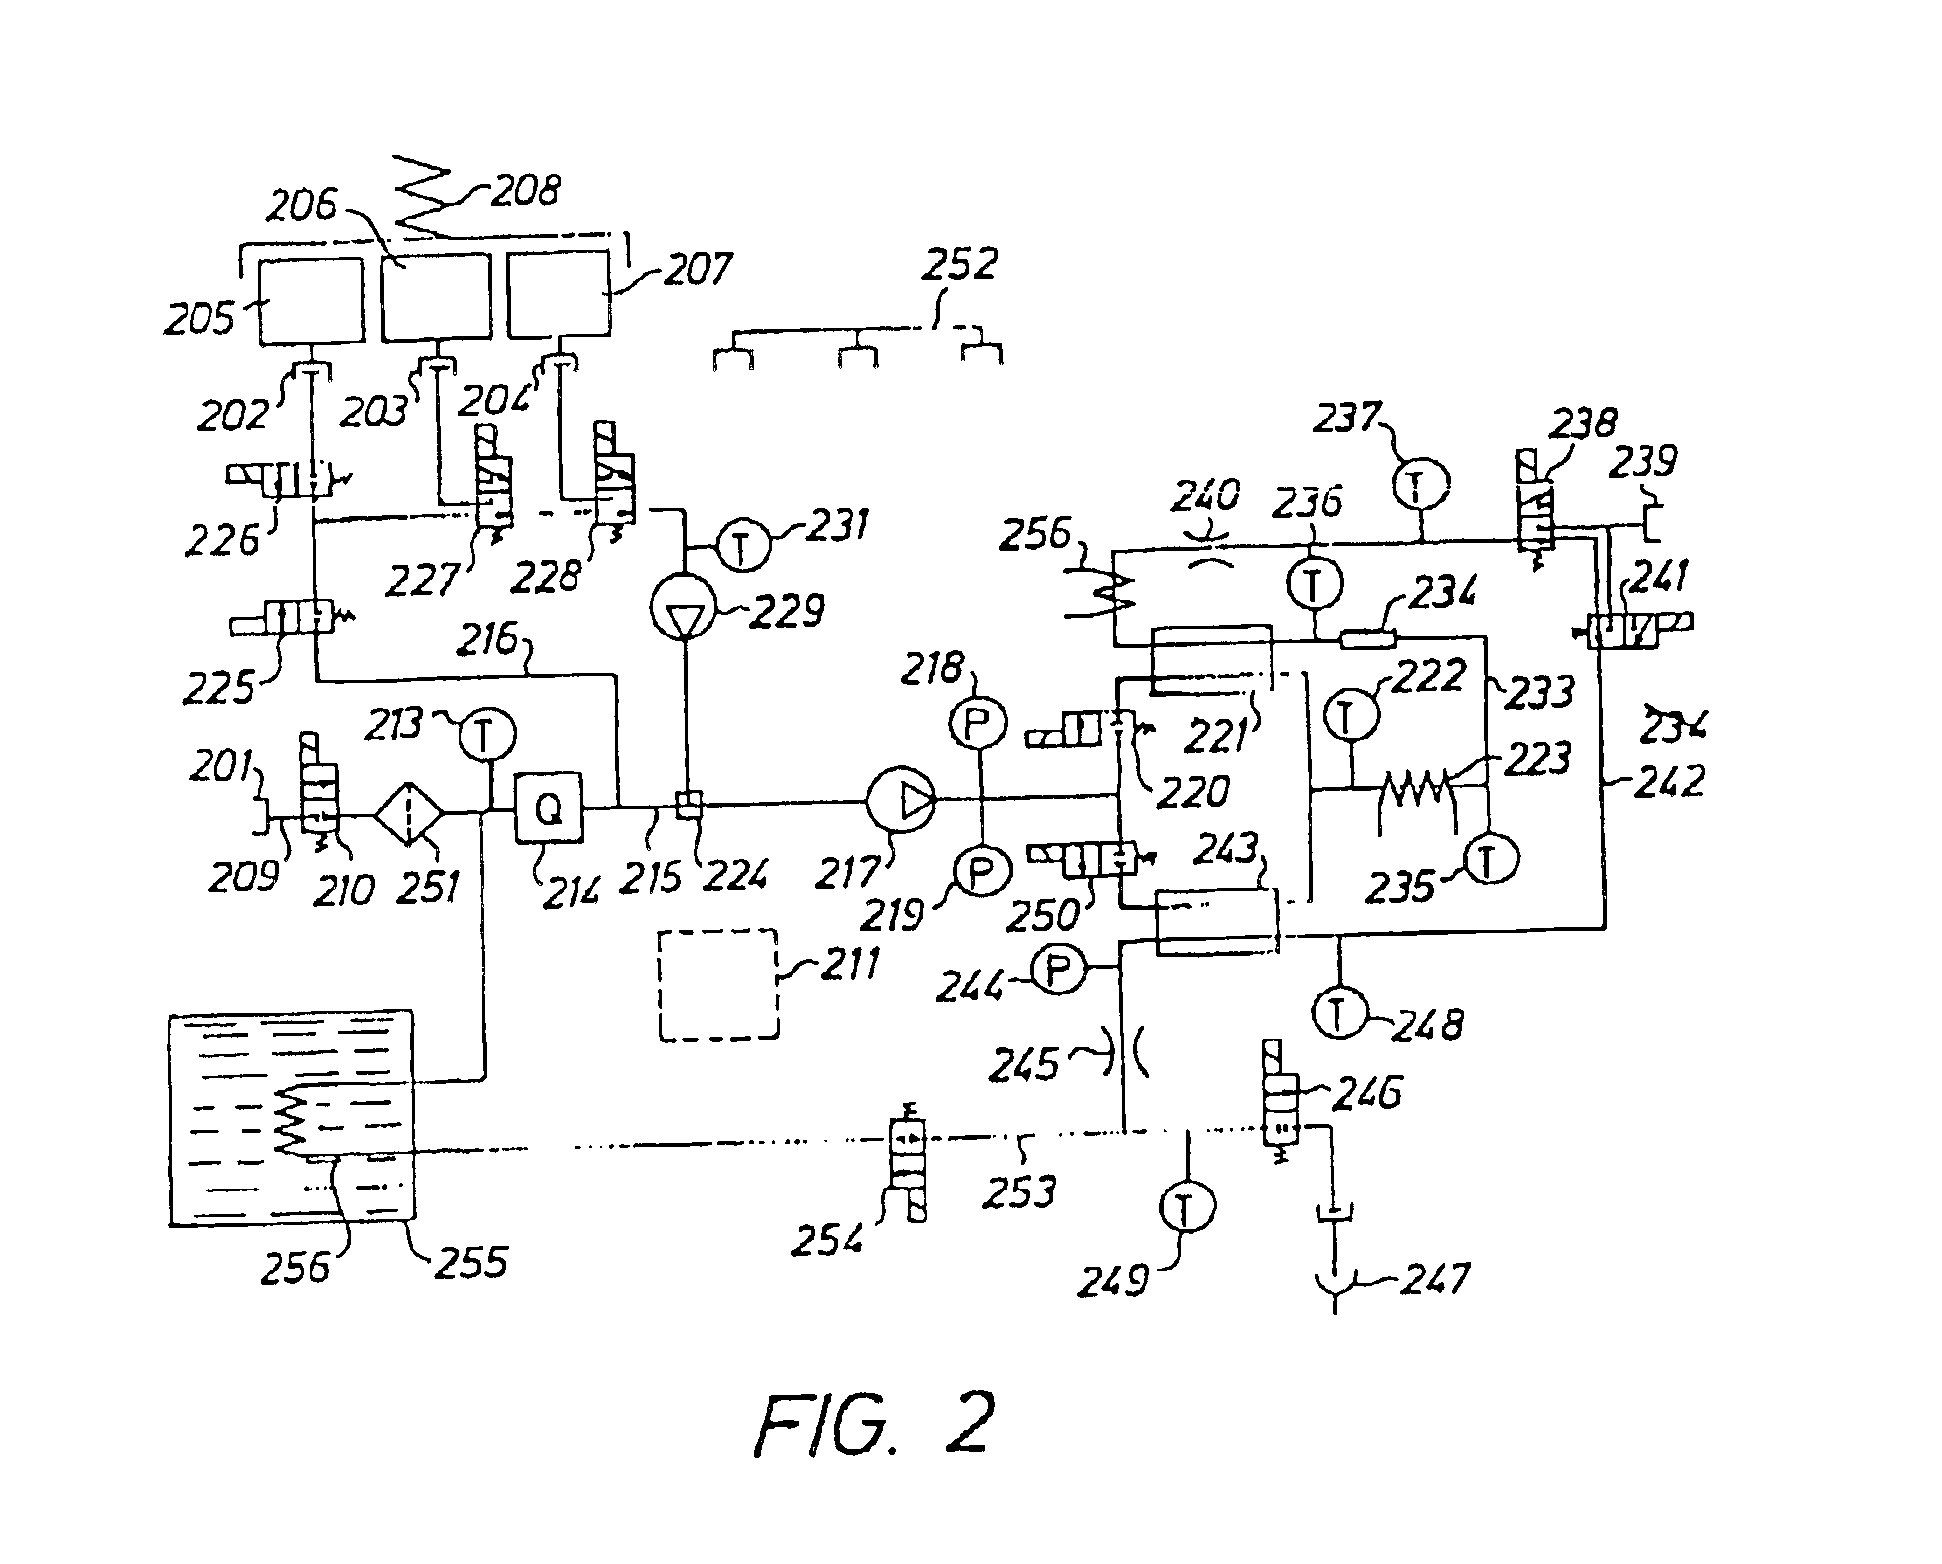 Method and apparatus for producing a sterile fluid